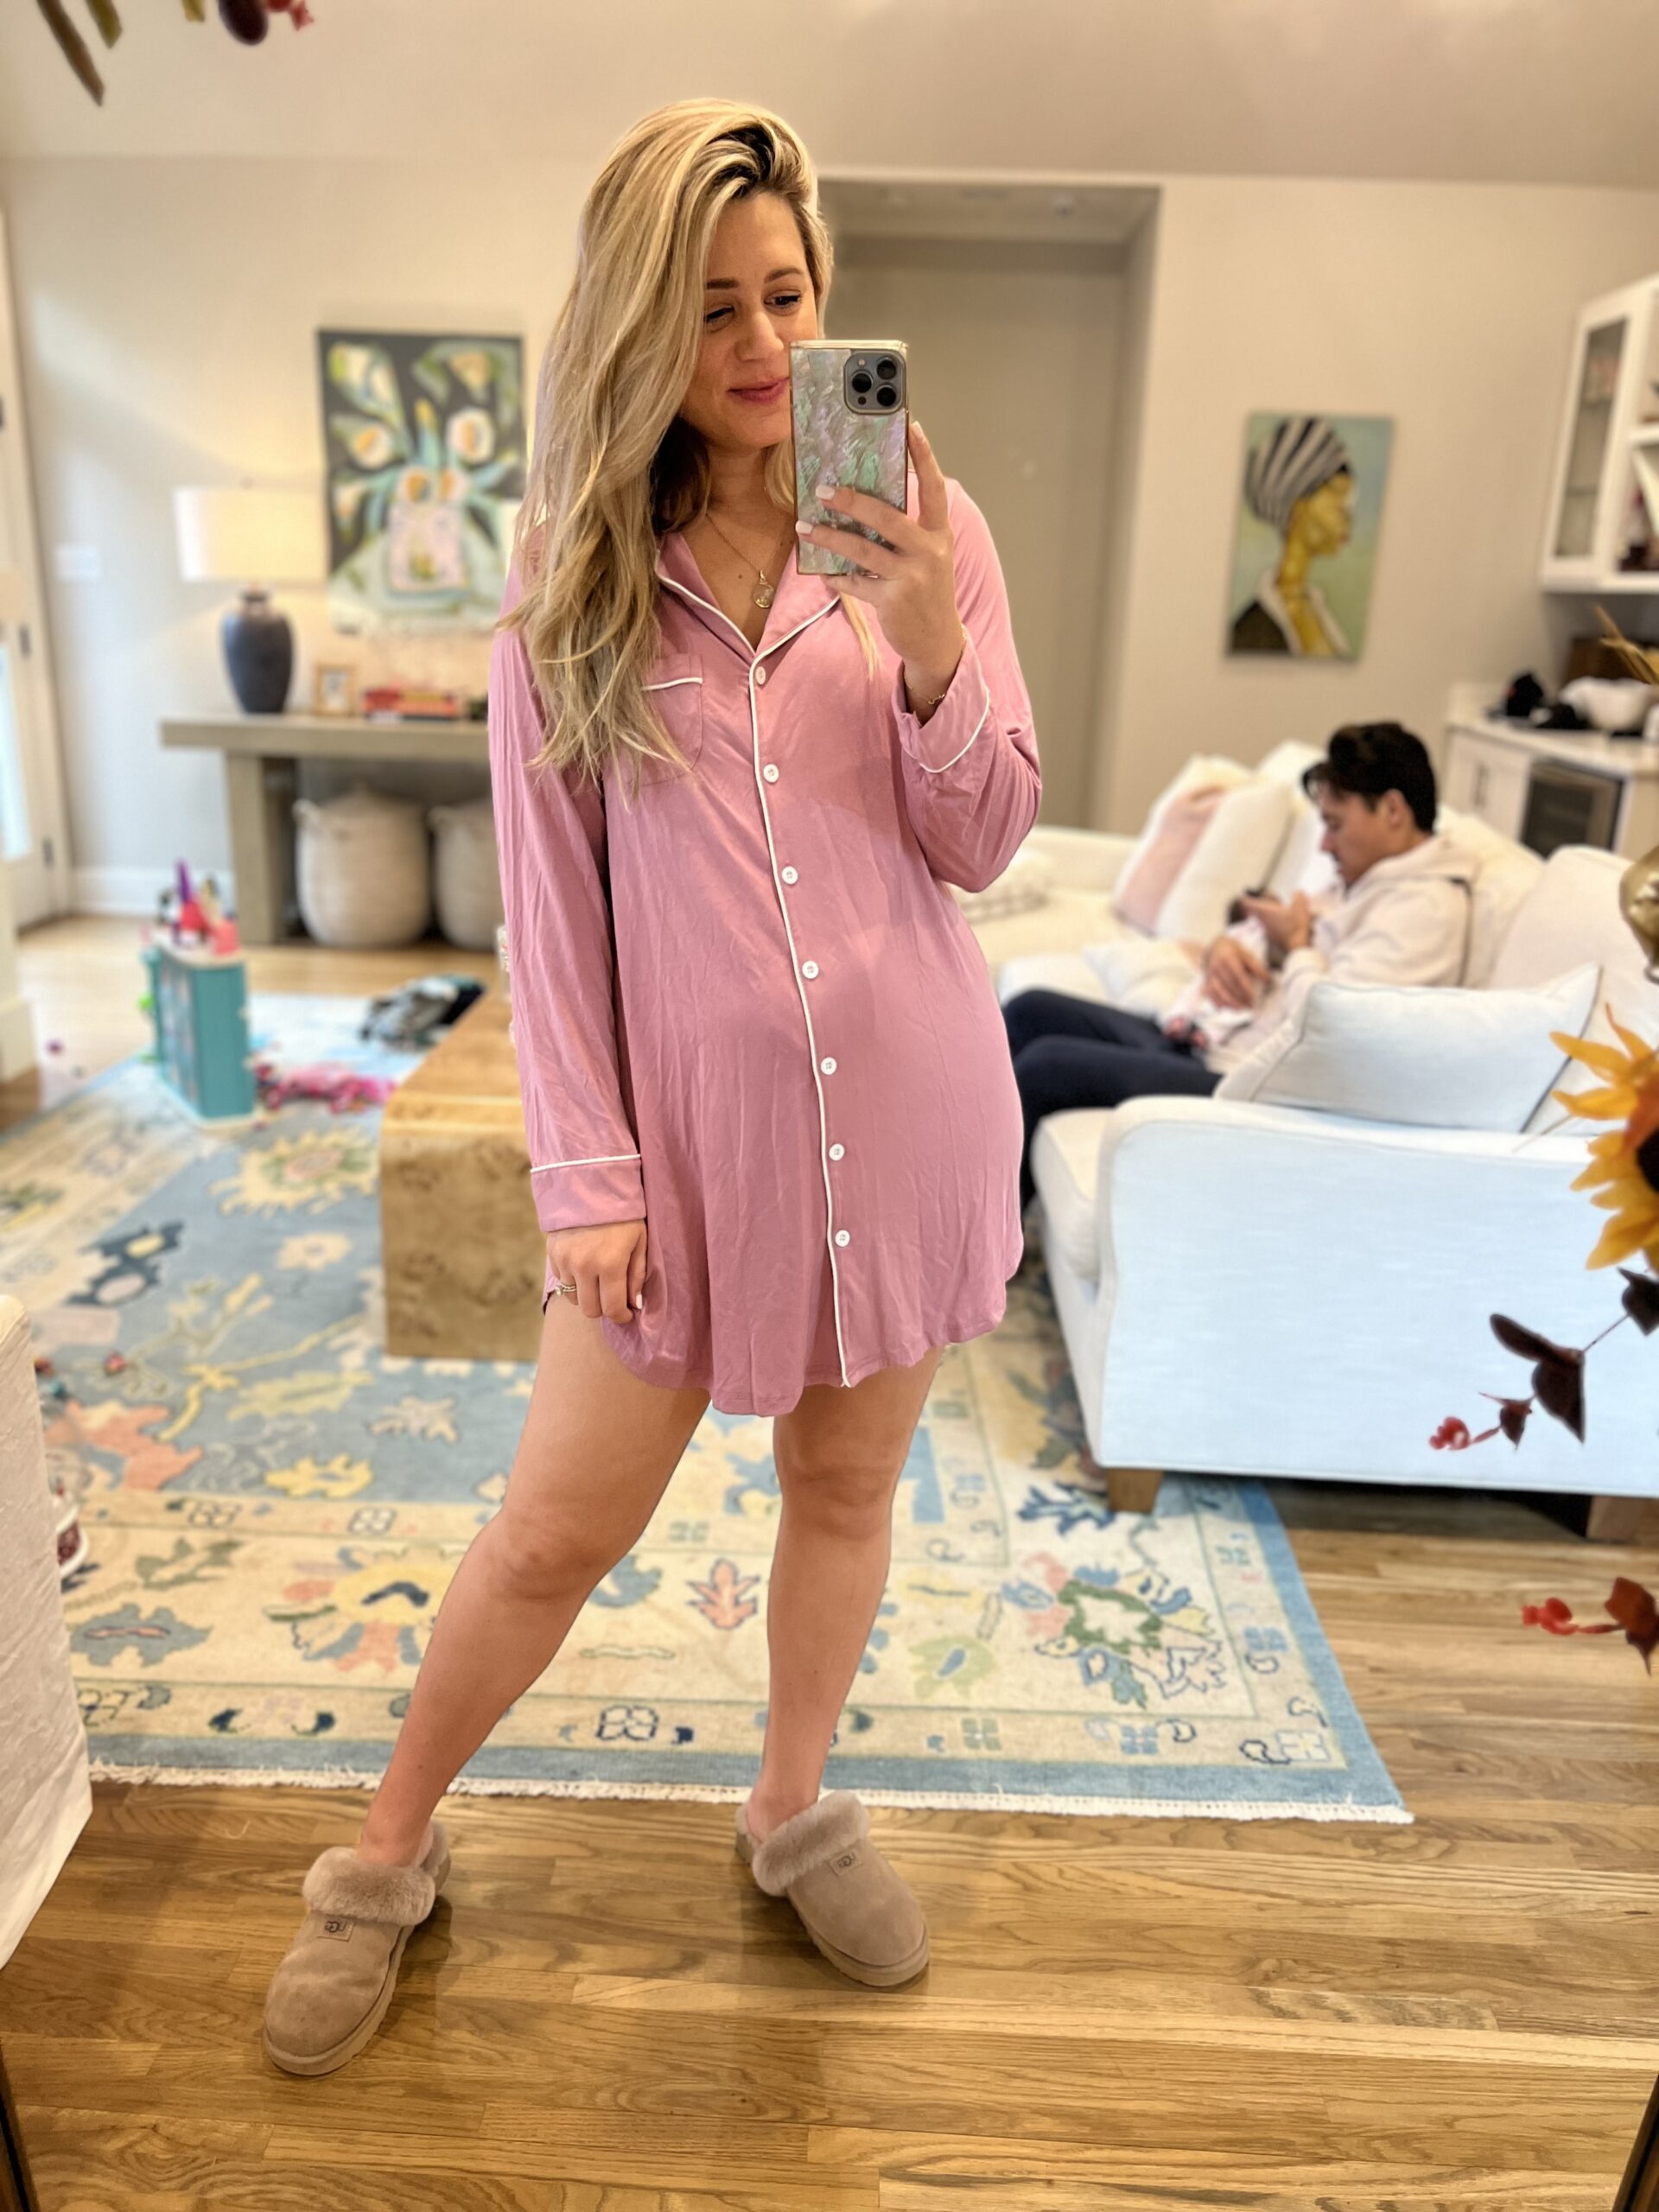 Lesley in a pink sleep shirt for comfy postpartum vibes